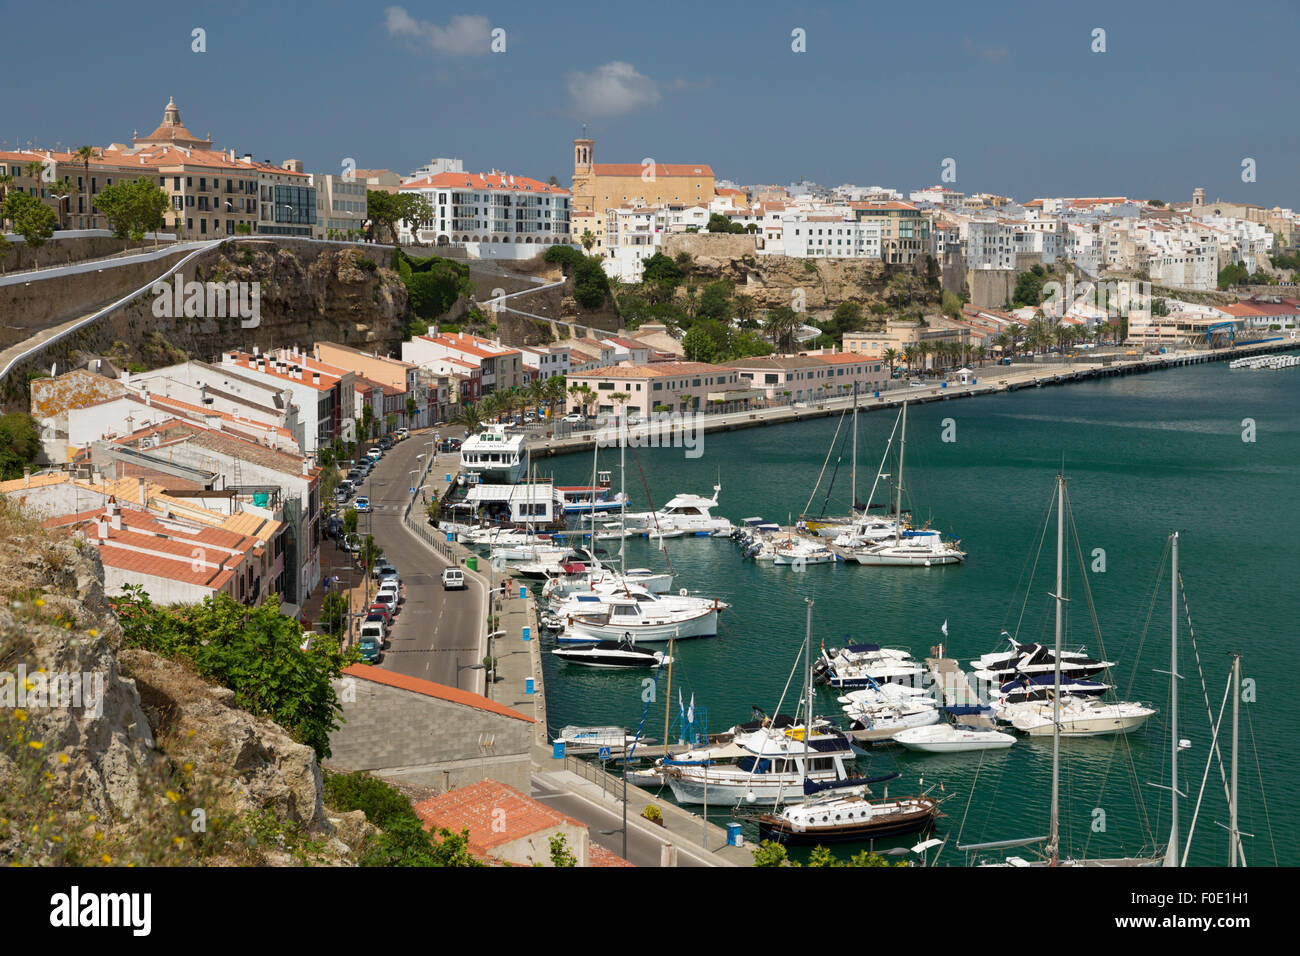 View over port and old town, Mahon, Menorca, Balearic Islands, Spain, Europe Stock Photo